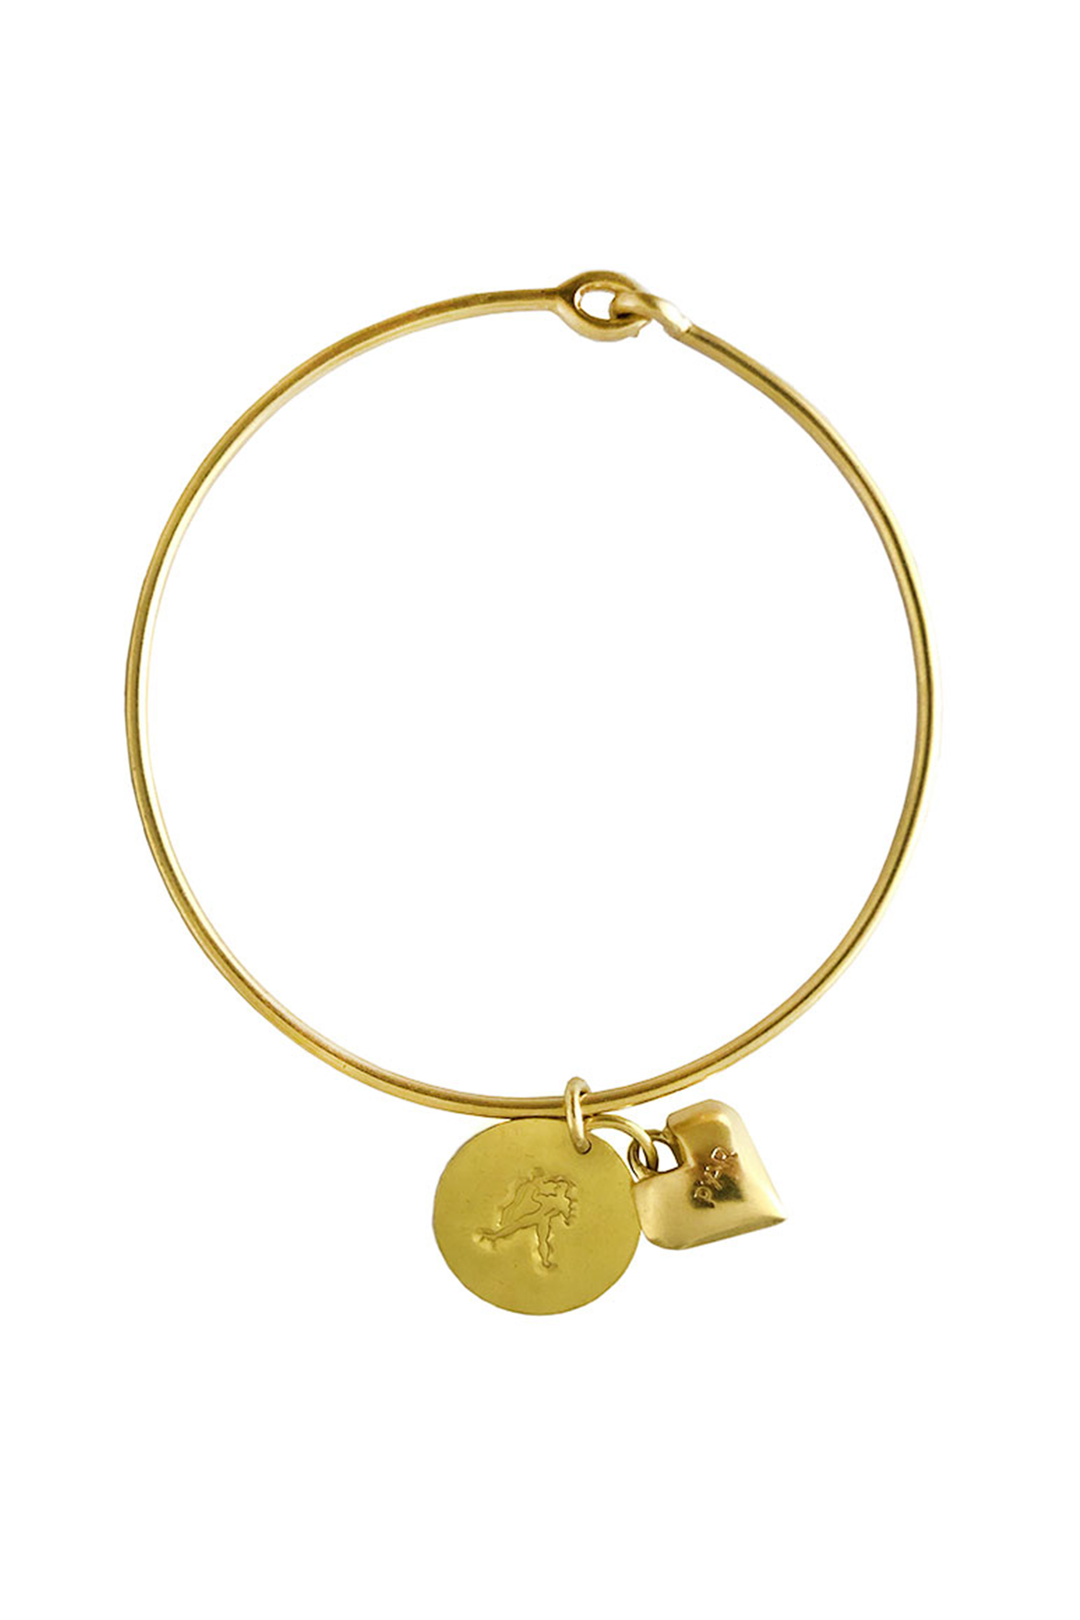 Women's zodiac bracelet by Pyar, available on ZERRIN with free Singapore shipping